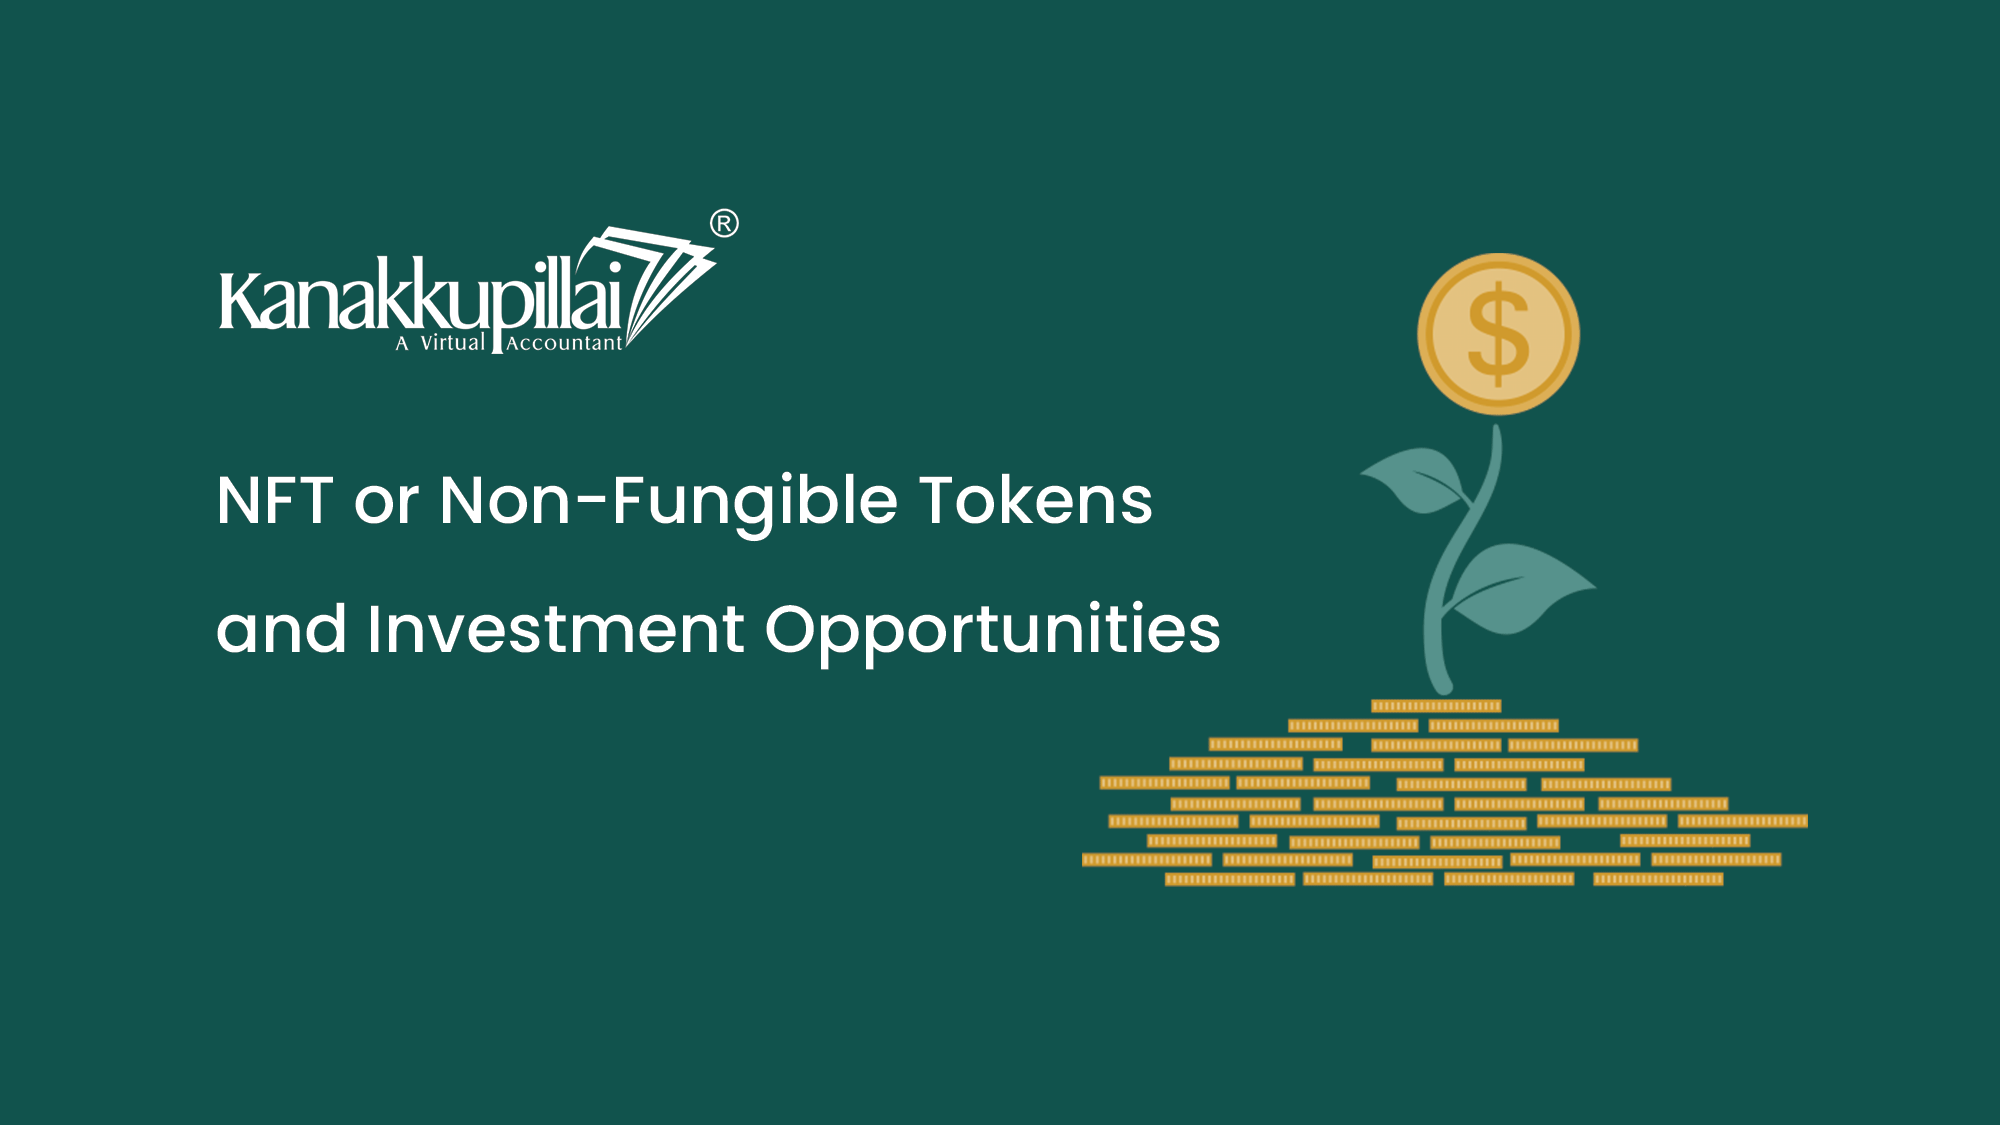 NFT or Non-Fungible Tokens and Investment Opportunities